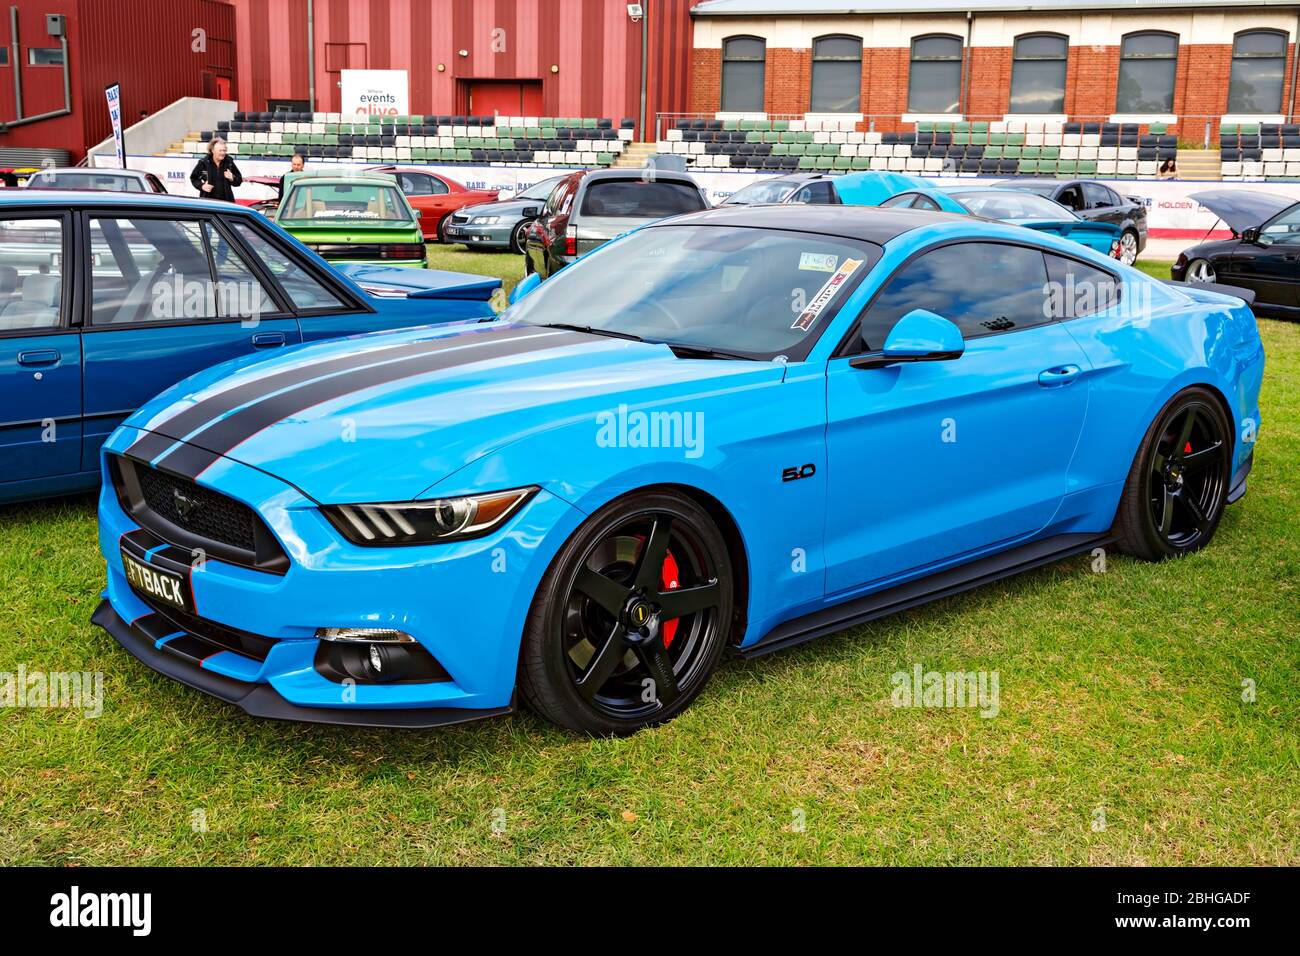 Automobiles /  American made 2018 Fastback Ford Mustang  displayed at a motor show in Melbourne Victoria Australia. Stock Photo